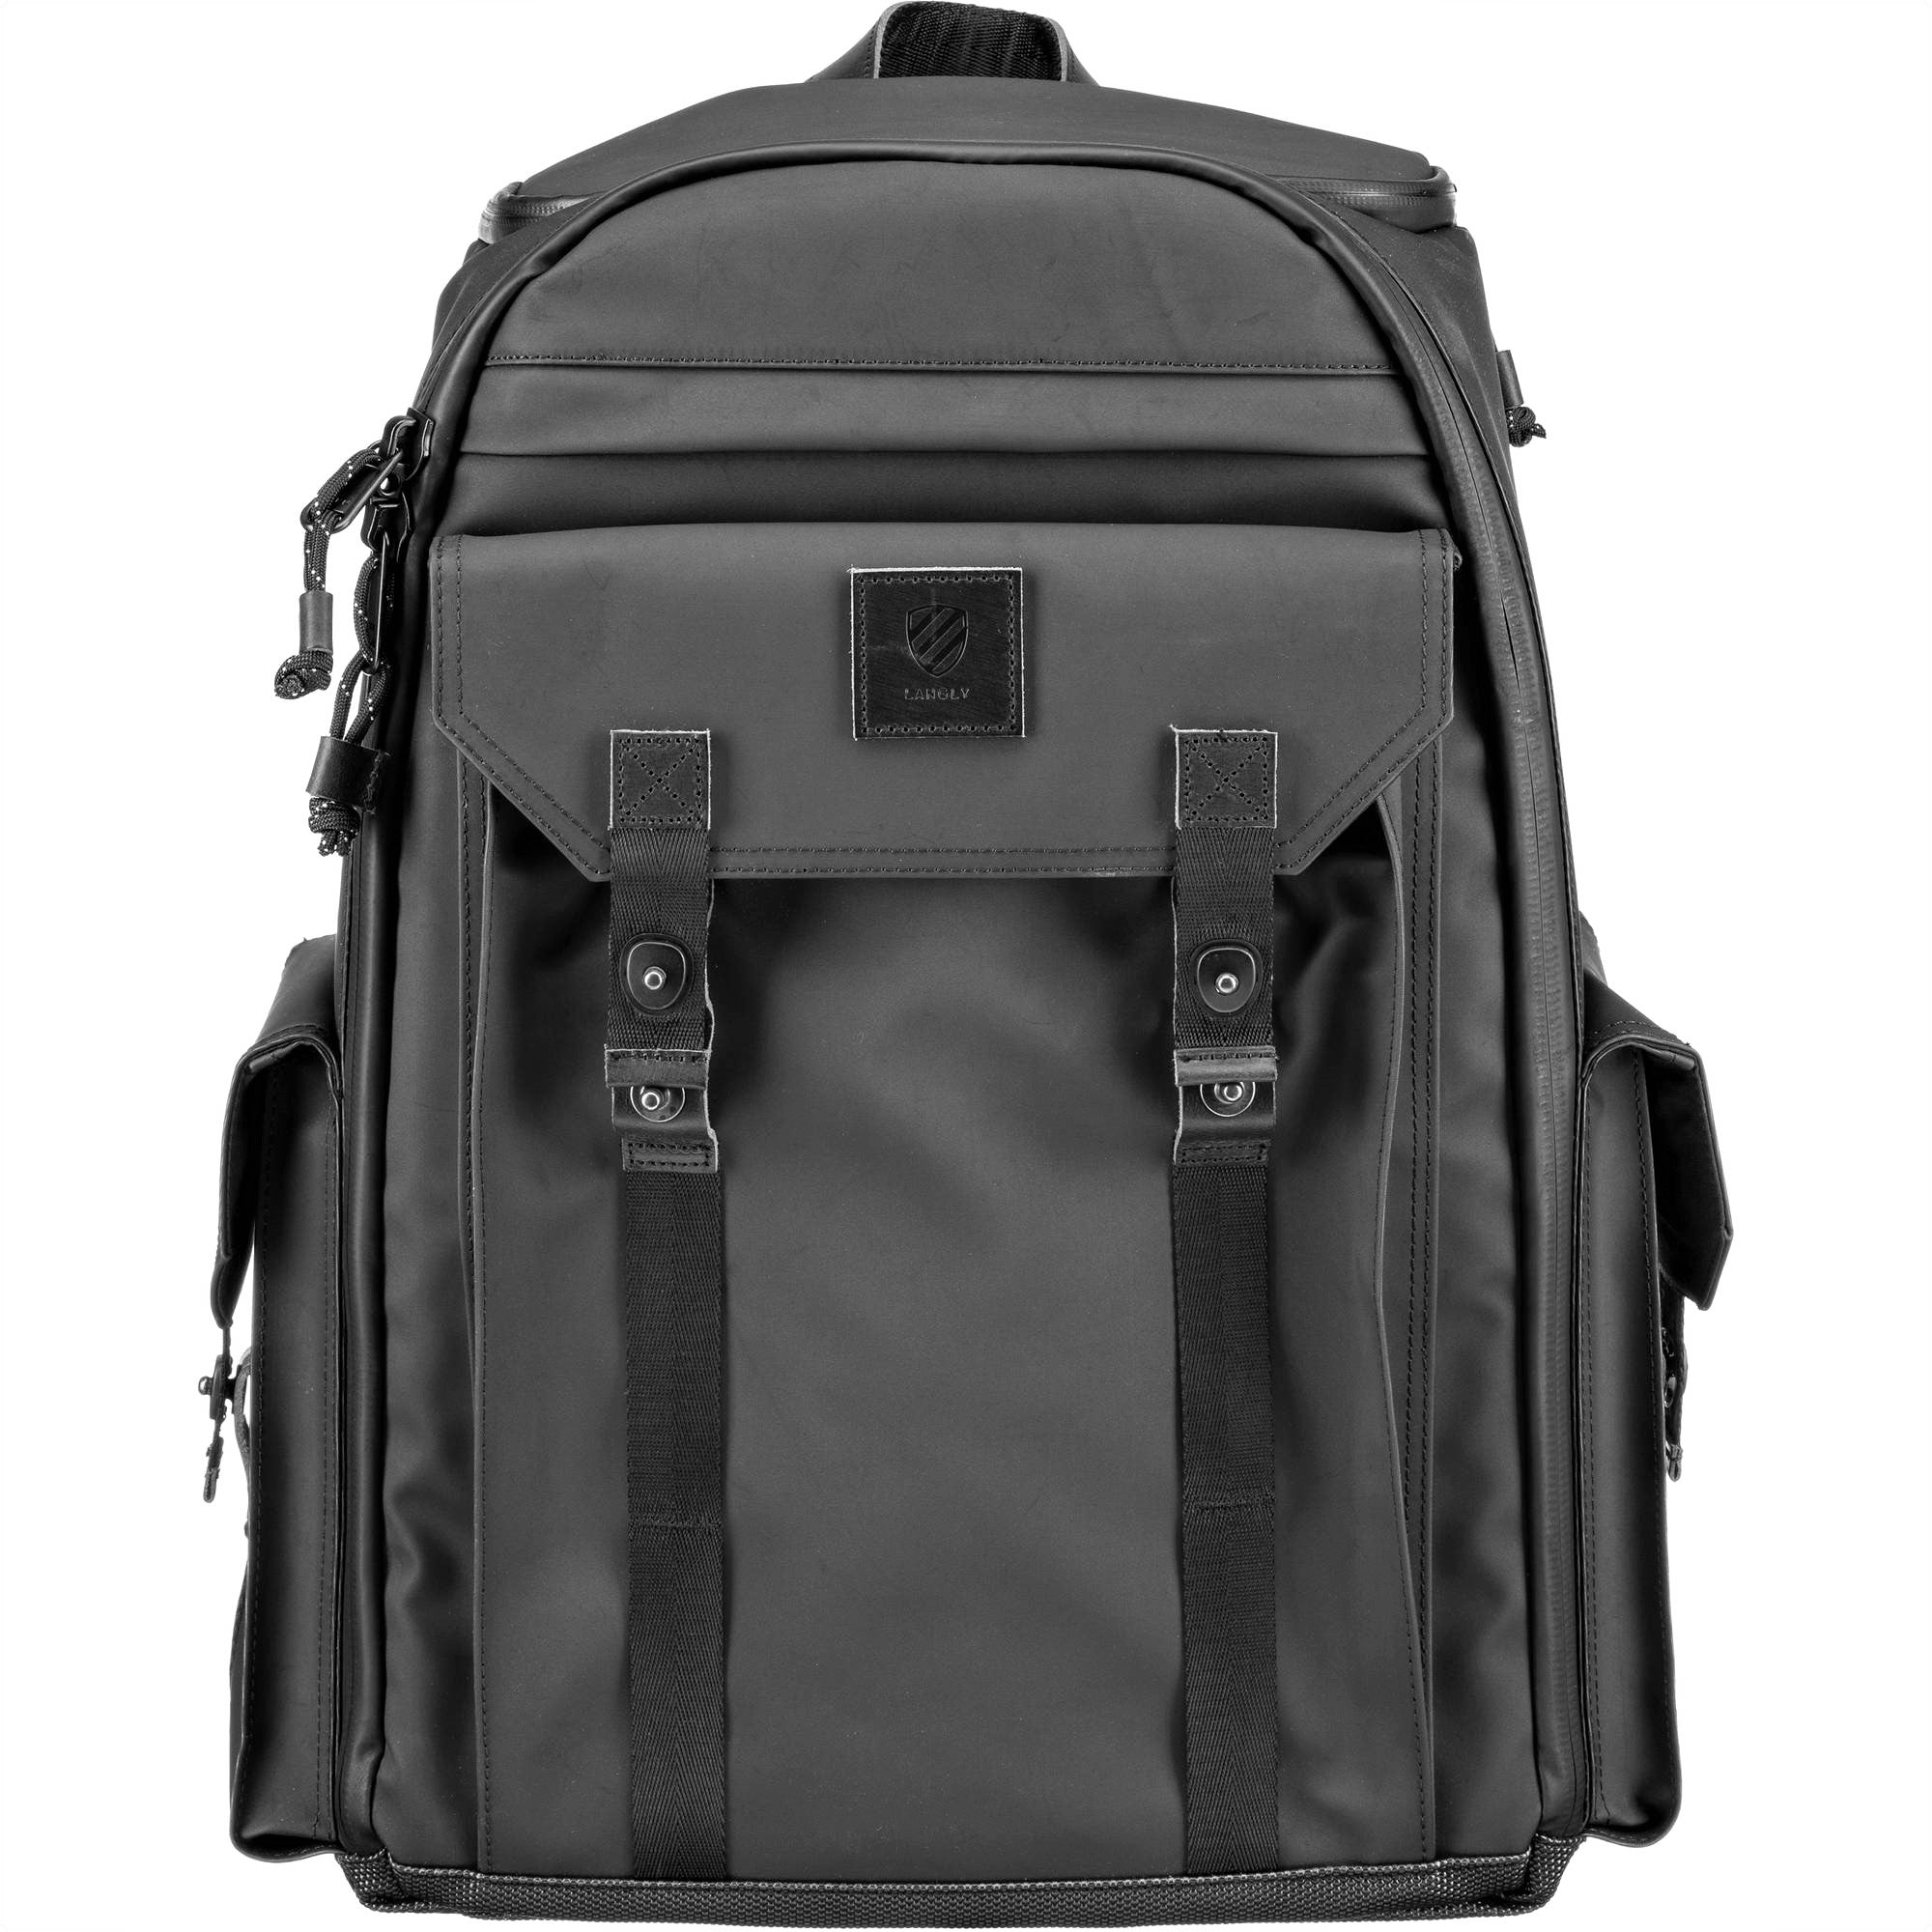 Langly Sierra Camera Backpack - Classic Blue